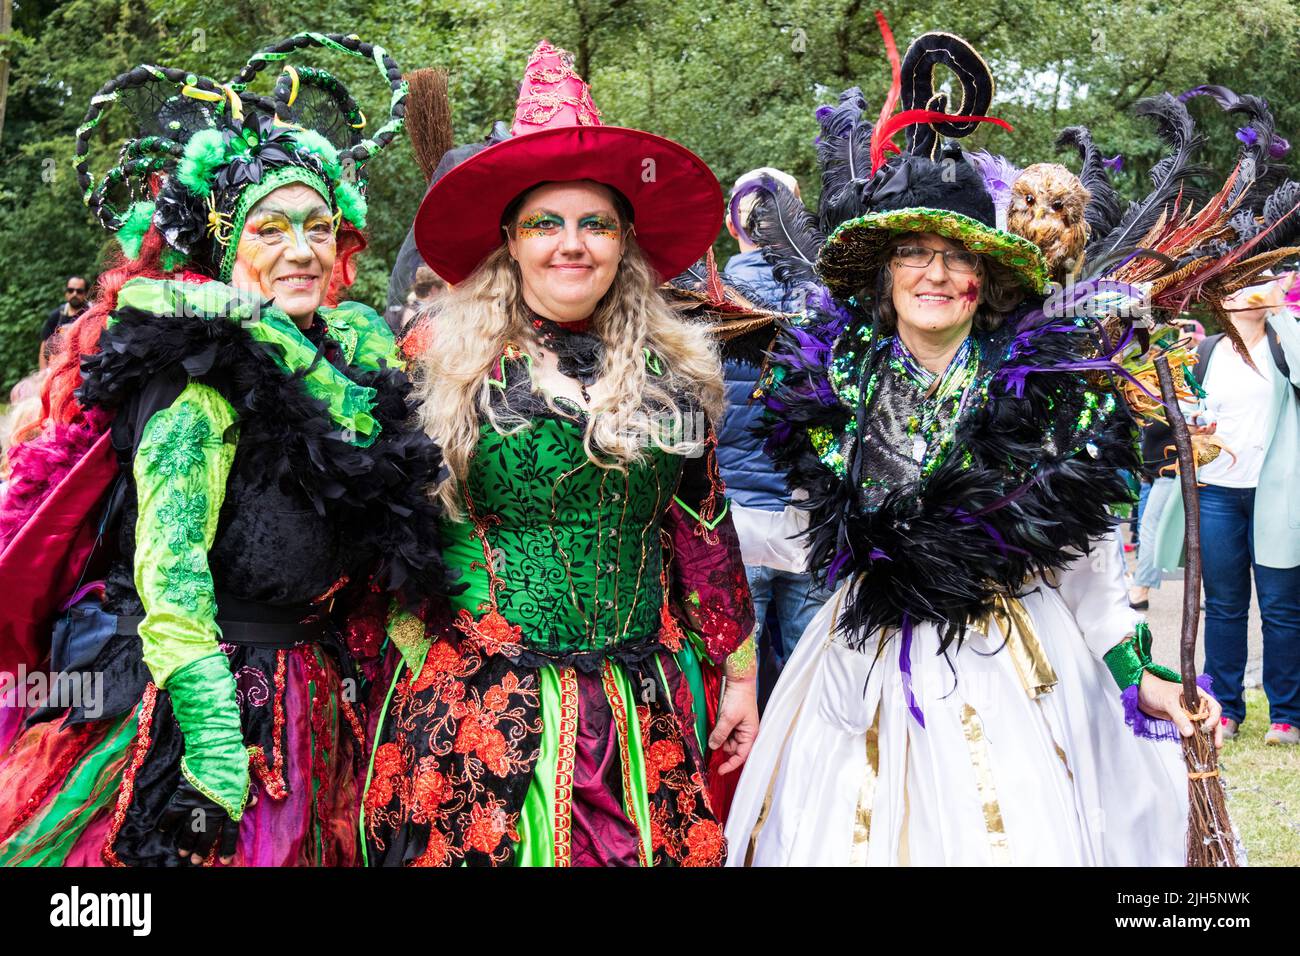 Bremen carnival with colourful costumes, masks and samba rhythms, Bremen, Germany, Europe Stock Photo